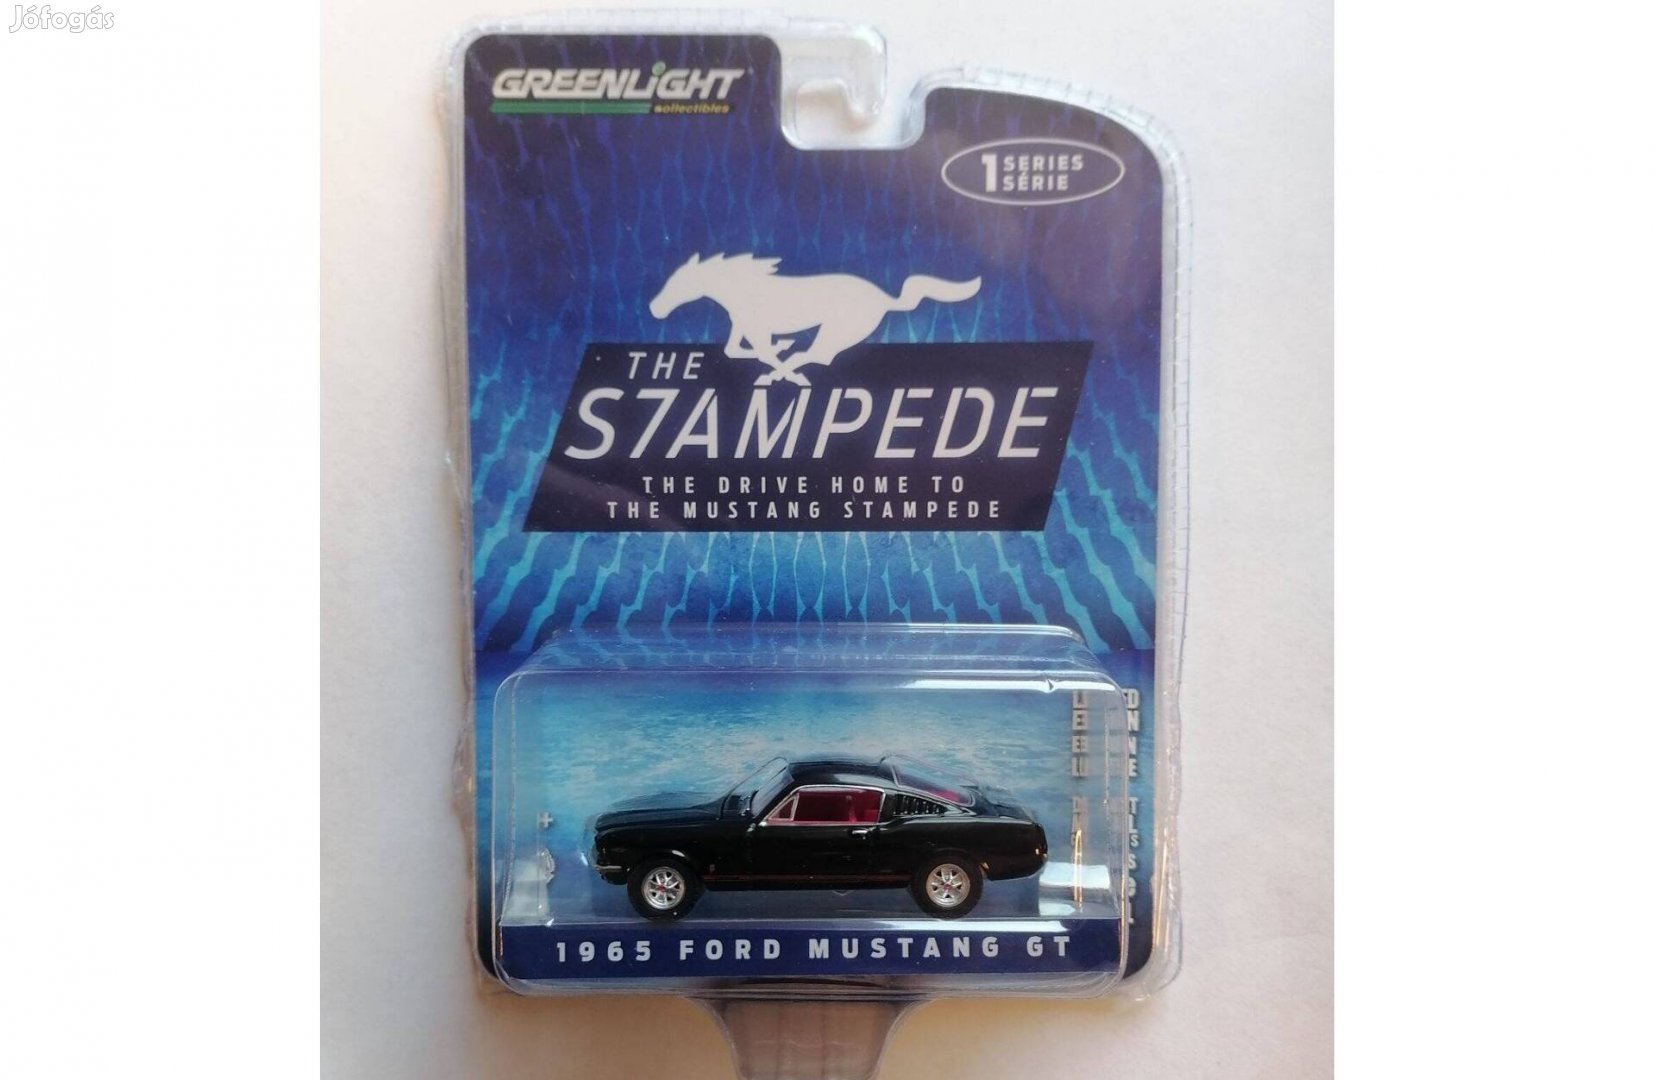 Greenlight 1965 ford mustang gt the drive home to the mustang stamped